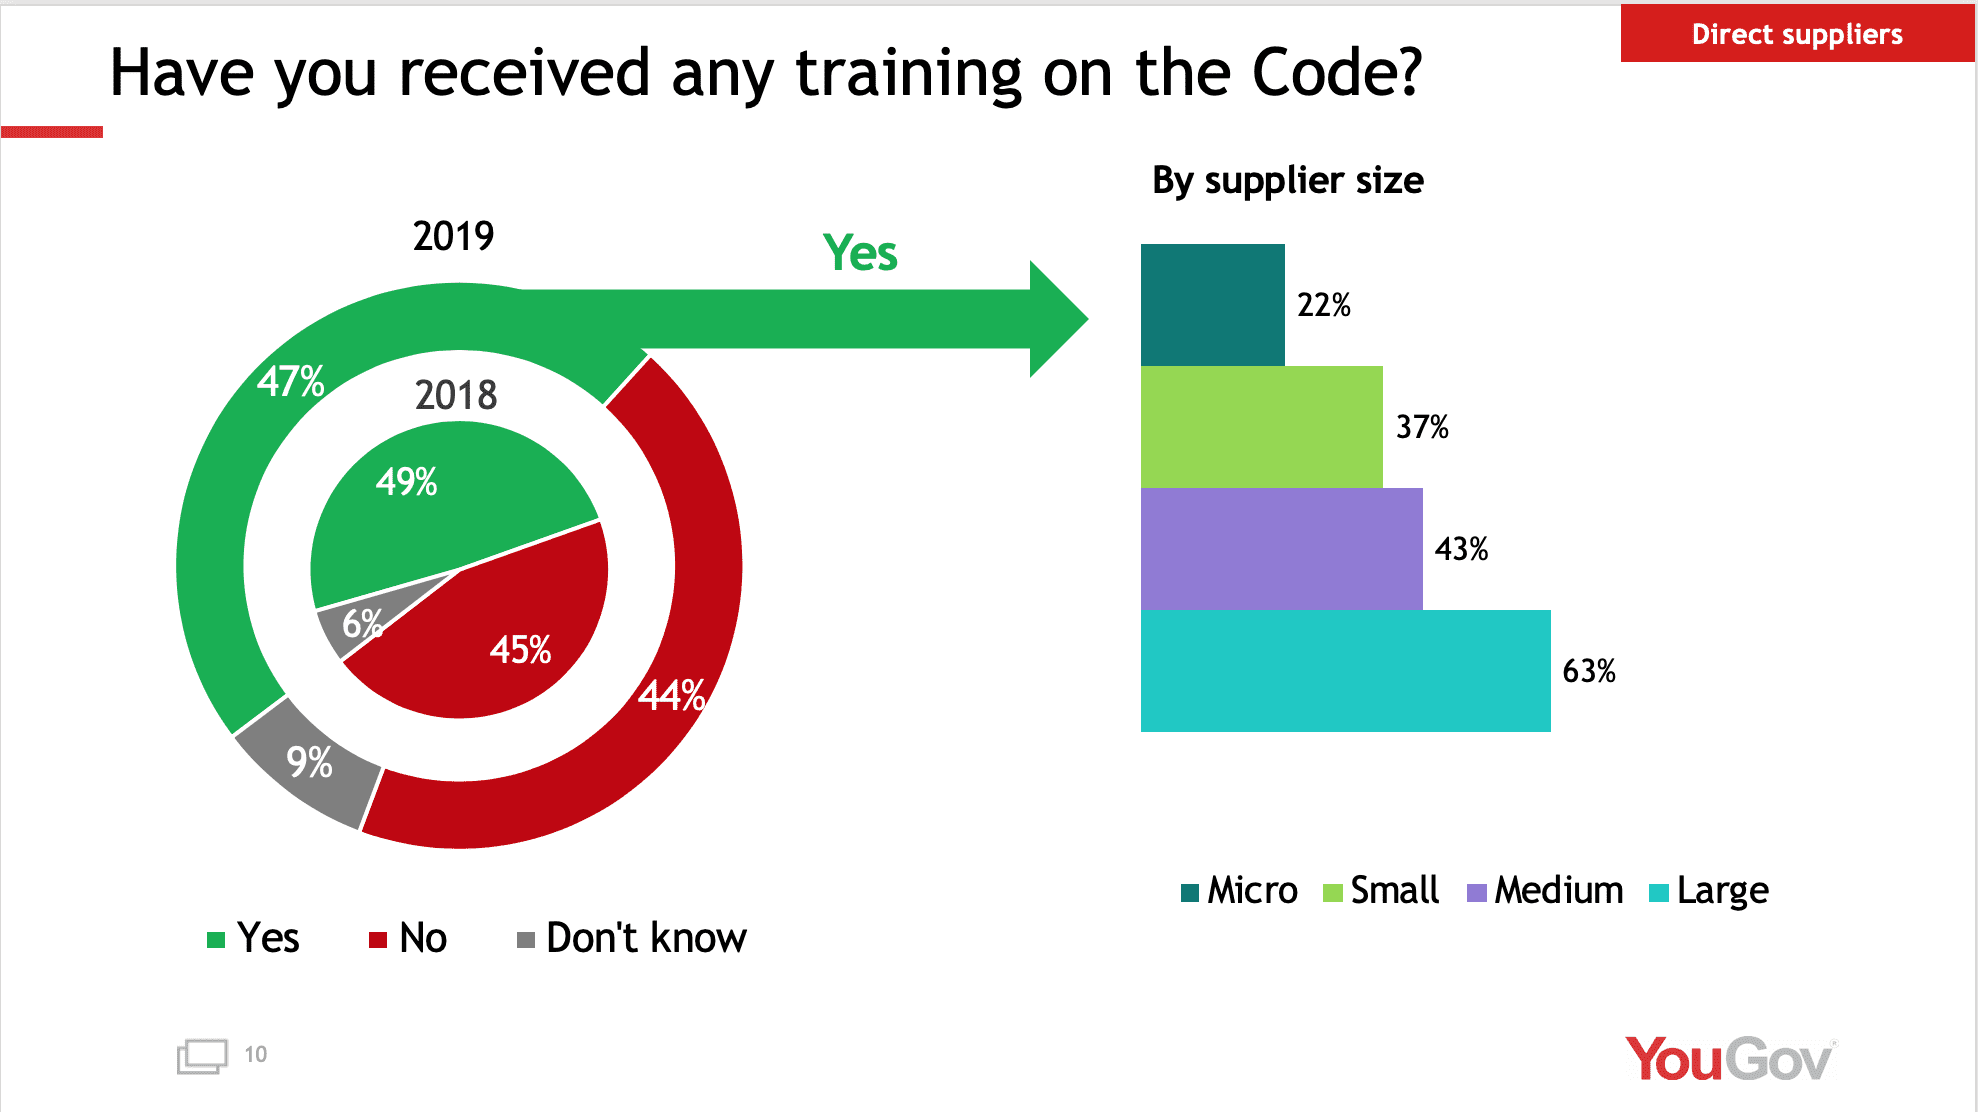 Graphs showing how many suppliers have received training on the code